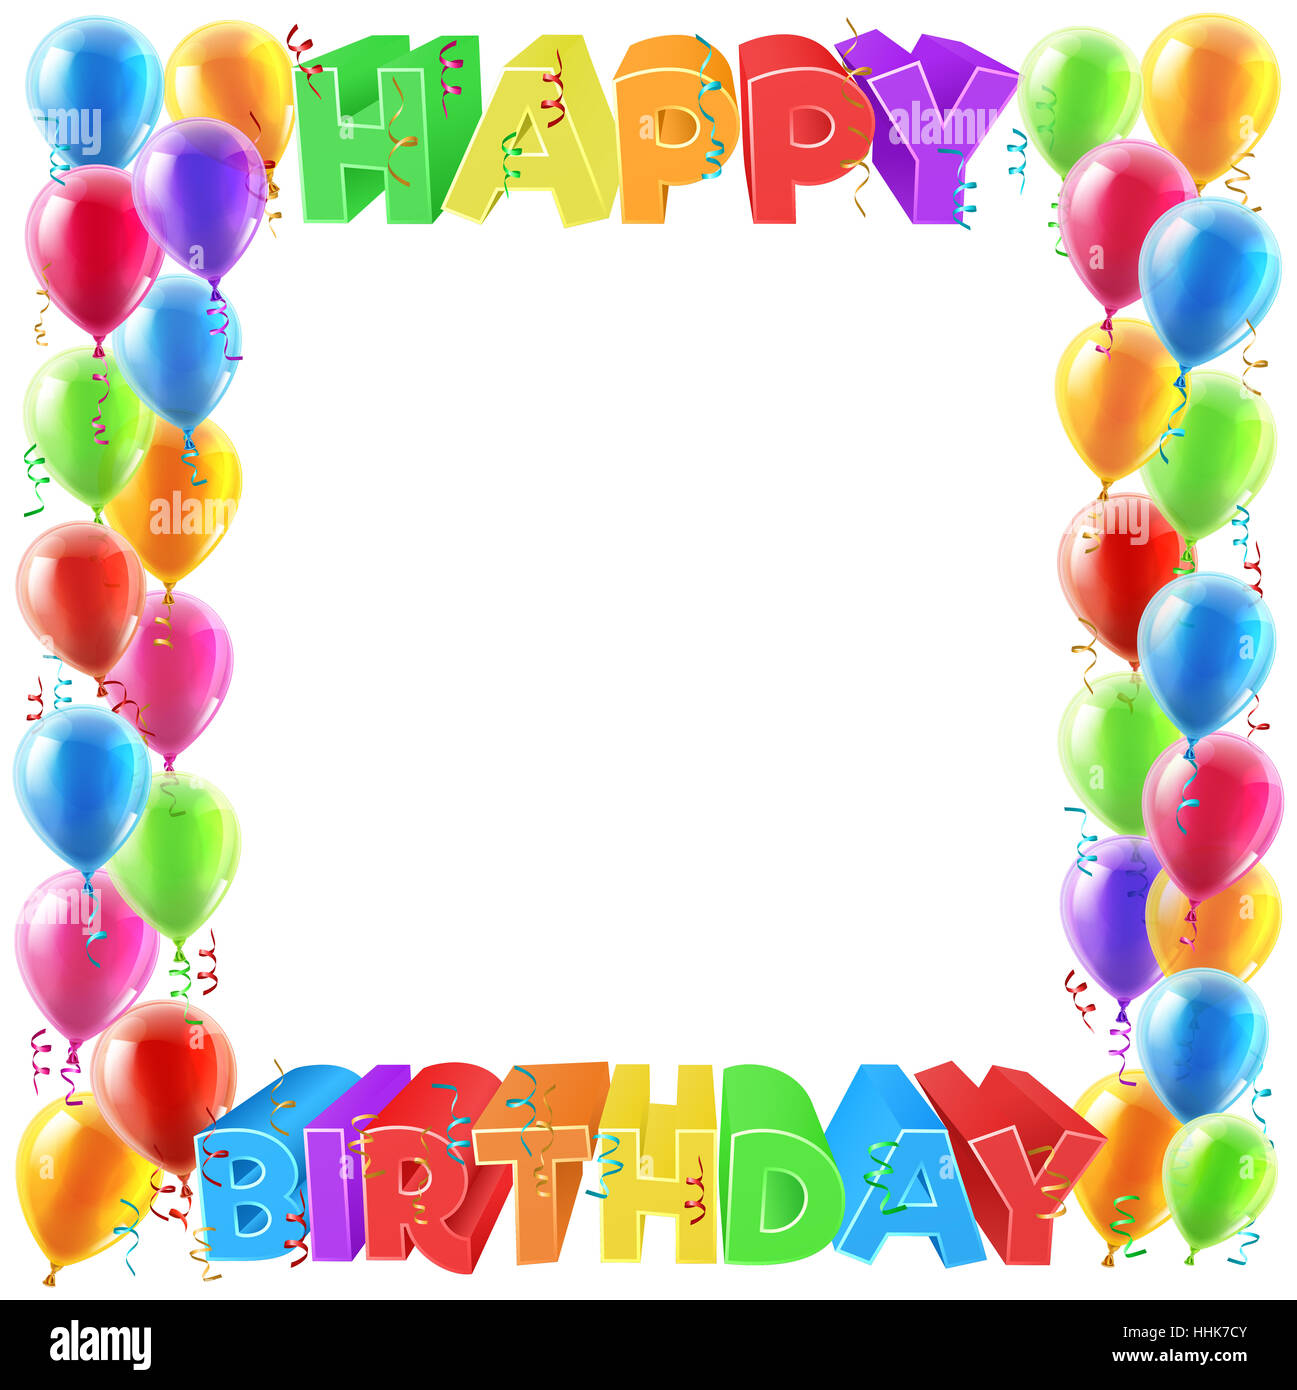 A balloons and Happy Birthday bright color word text sign invite border ...